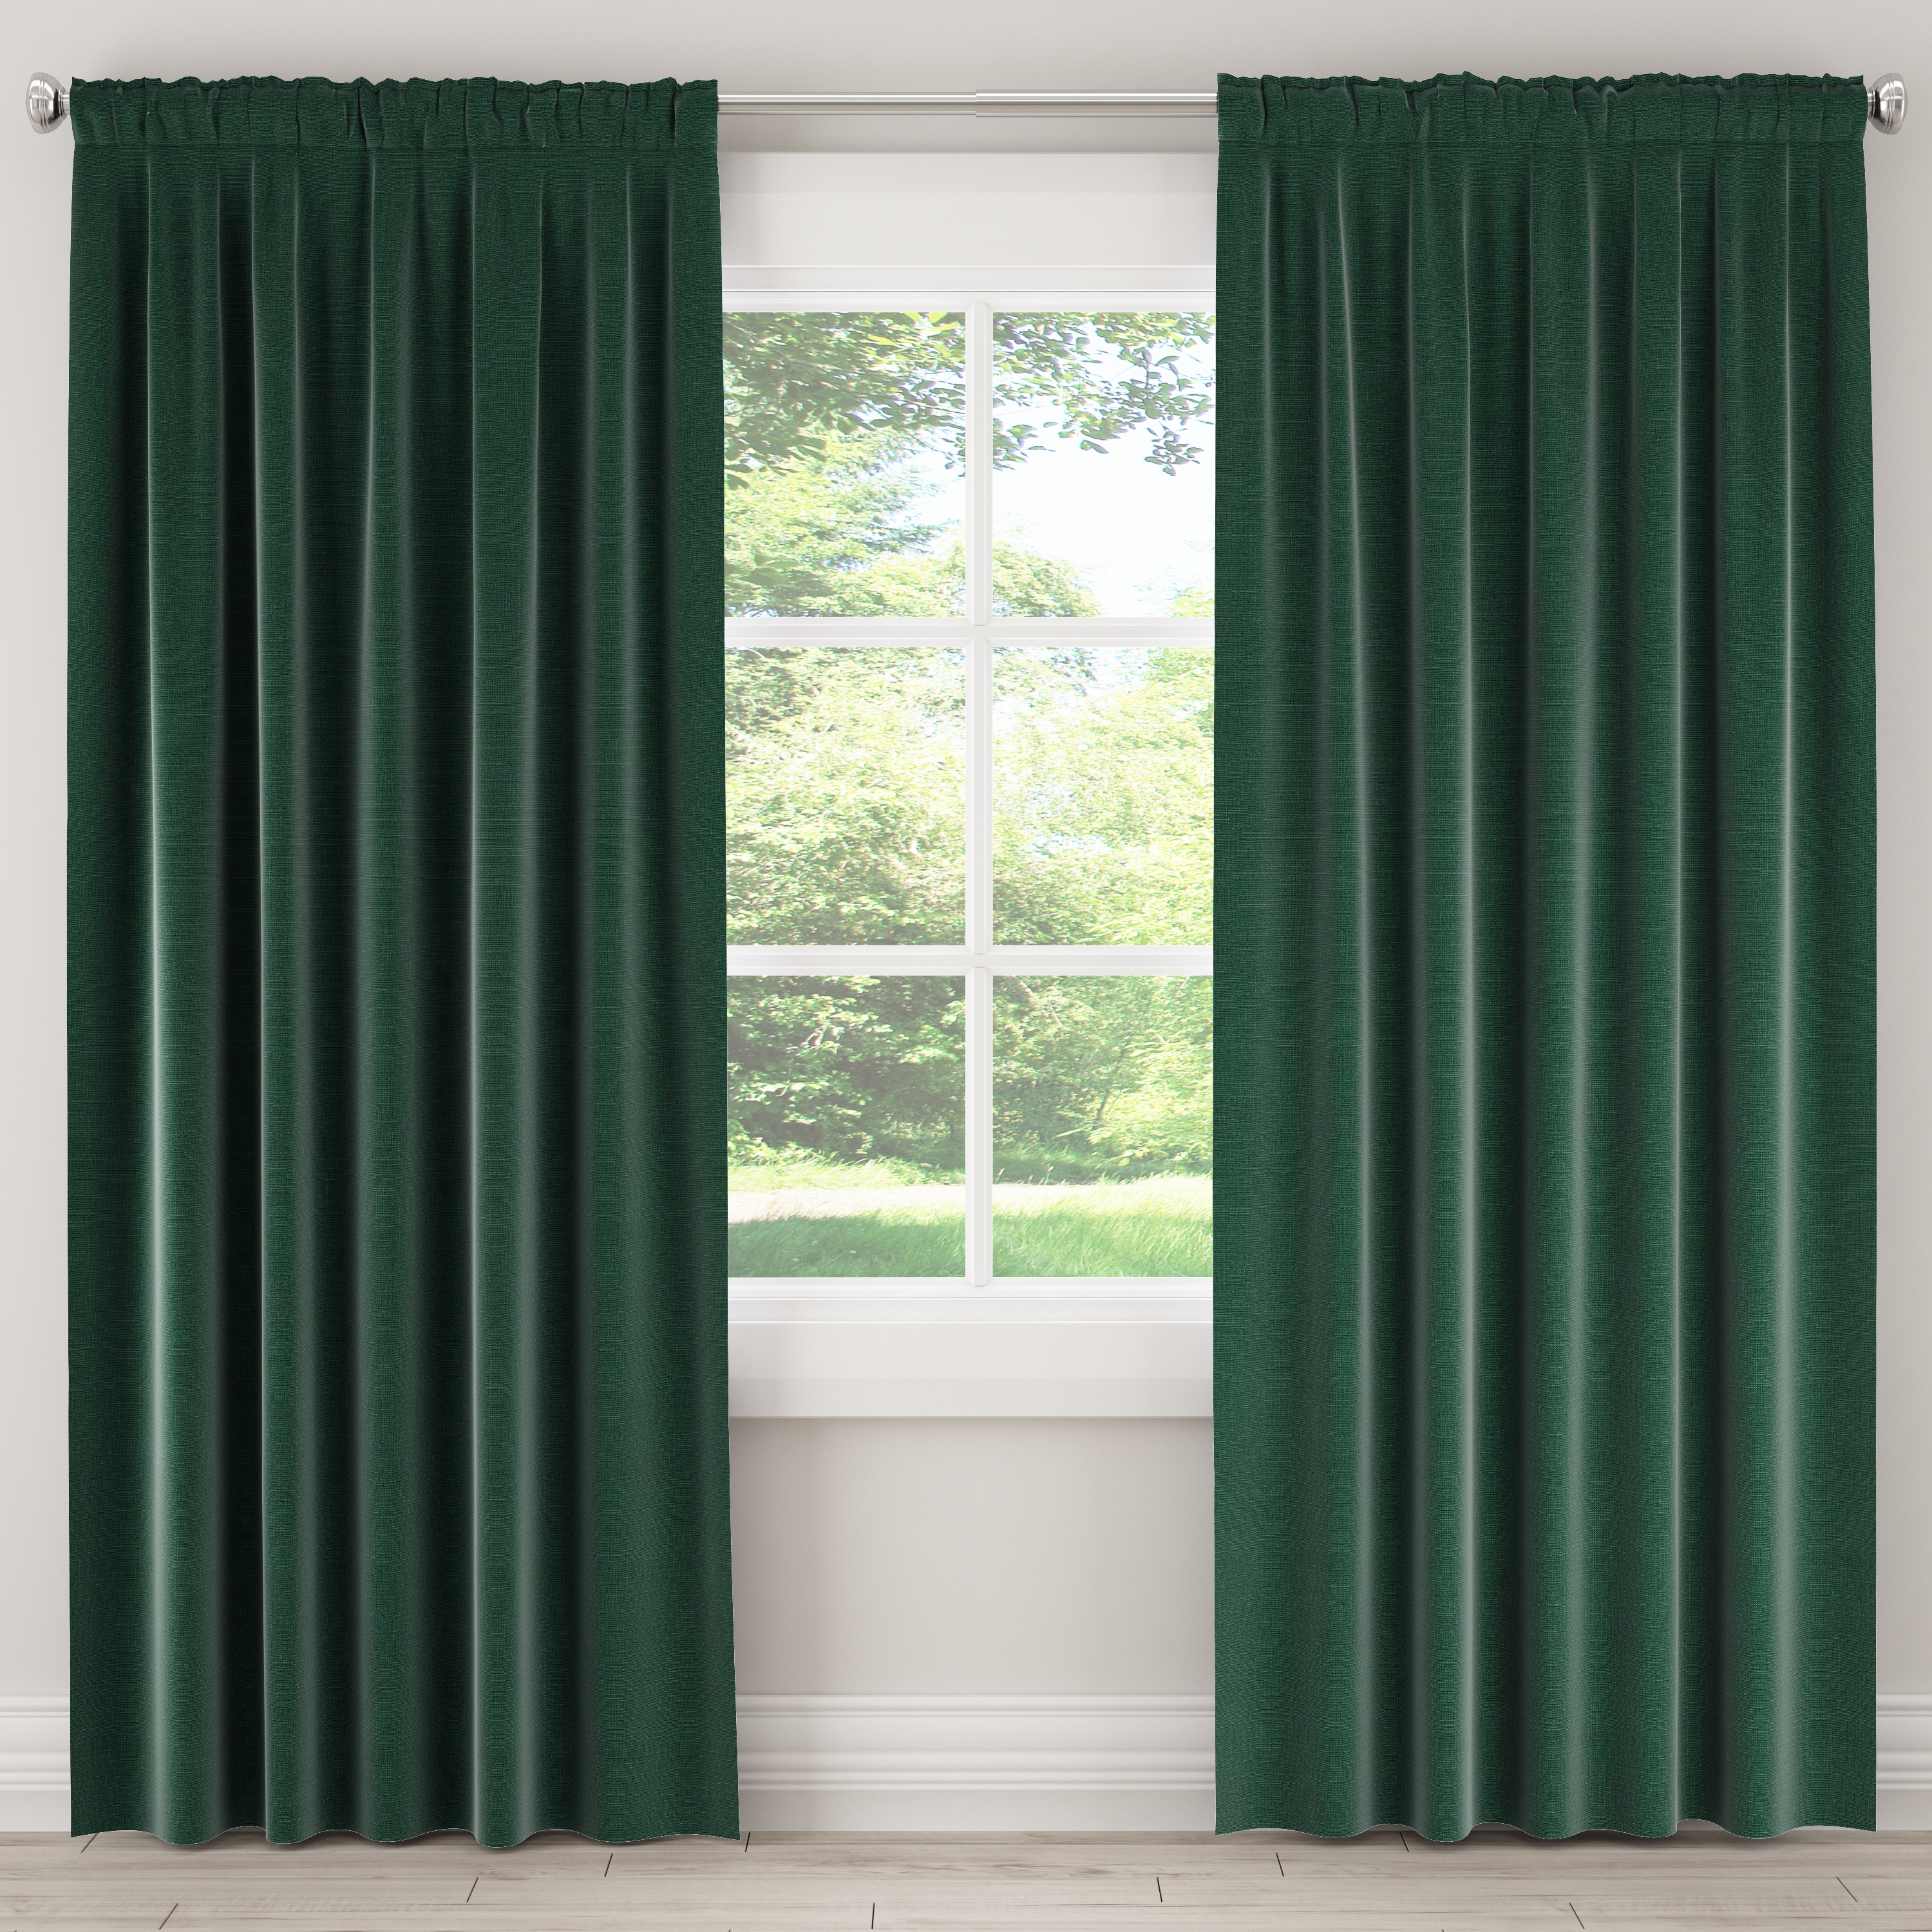 Conifer Green Curtain Panel, 96" x 50" Unlined - Image 2